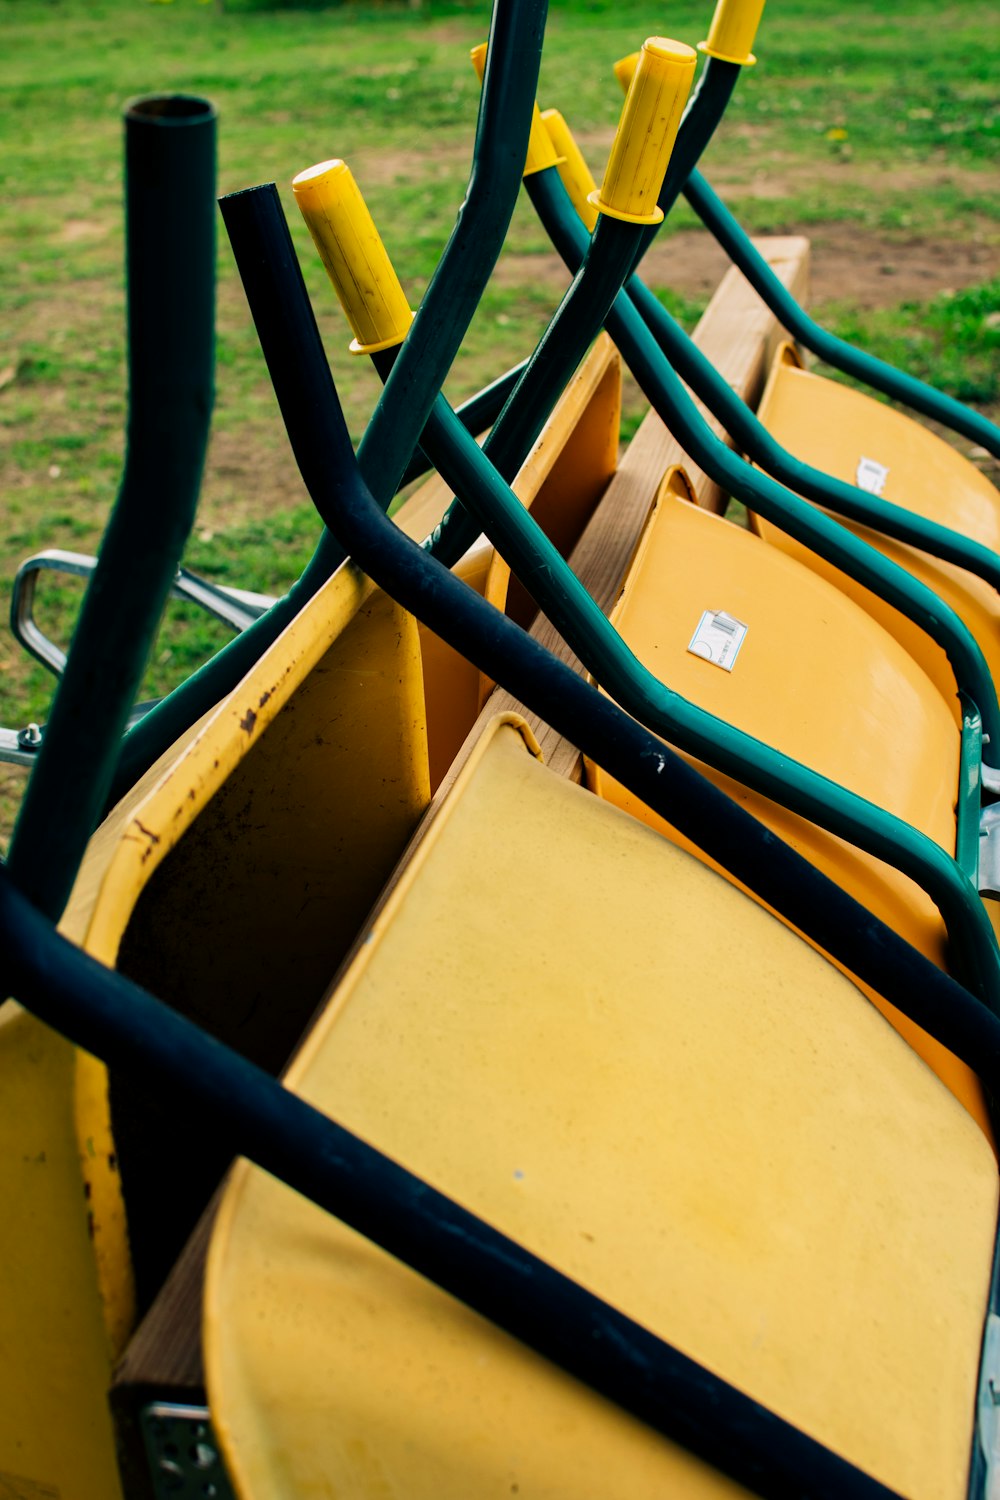 a yellow and green playground toy